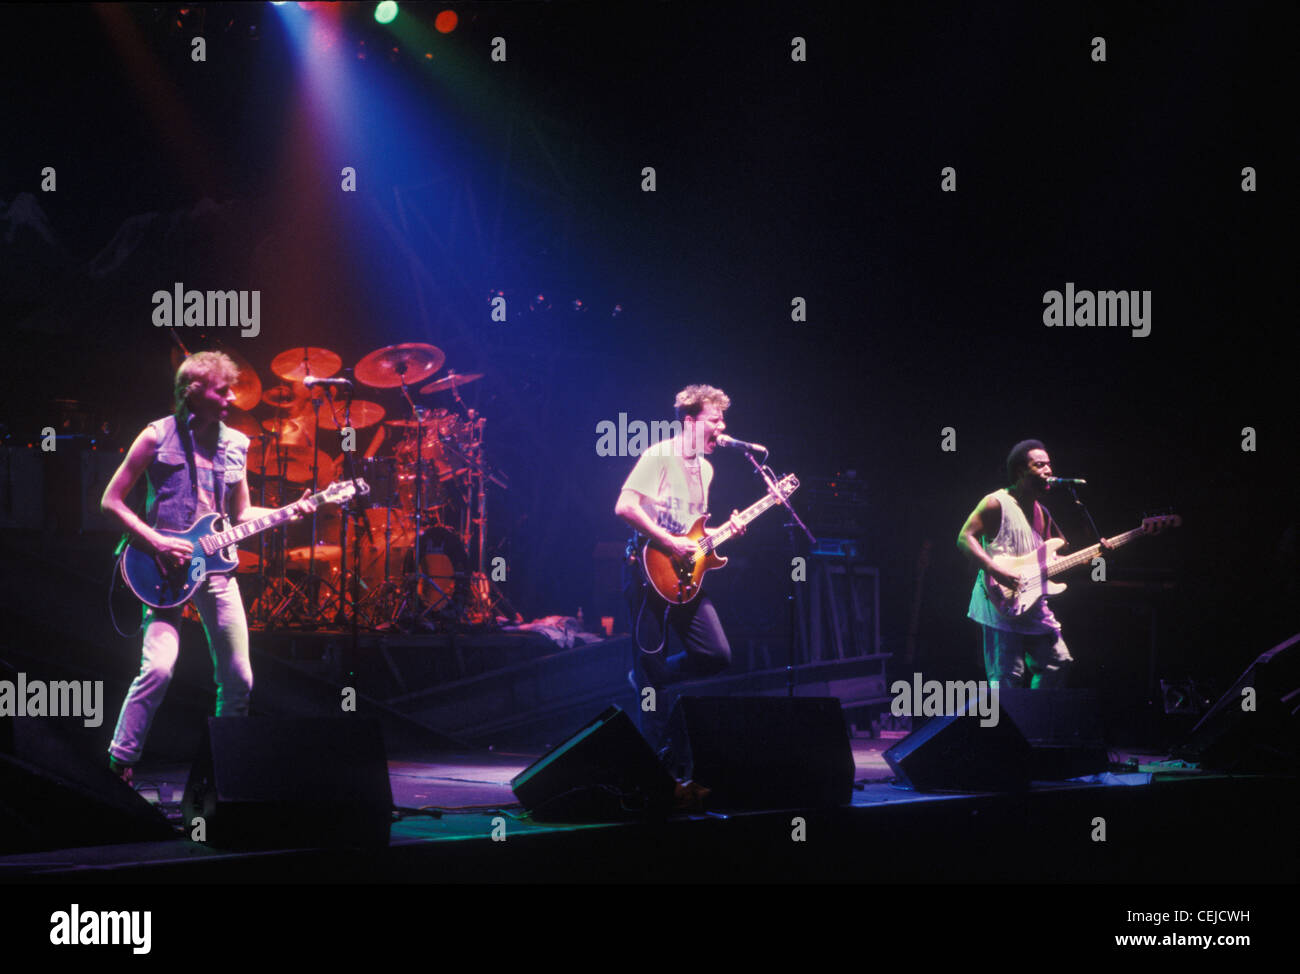 Big Country Scottish Rock band live on stage concert performance Glasgow Scotland 1980s. UK HOMER SYKES Stock Photo